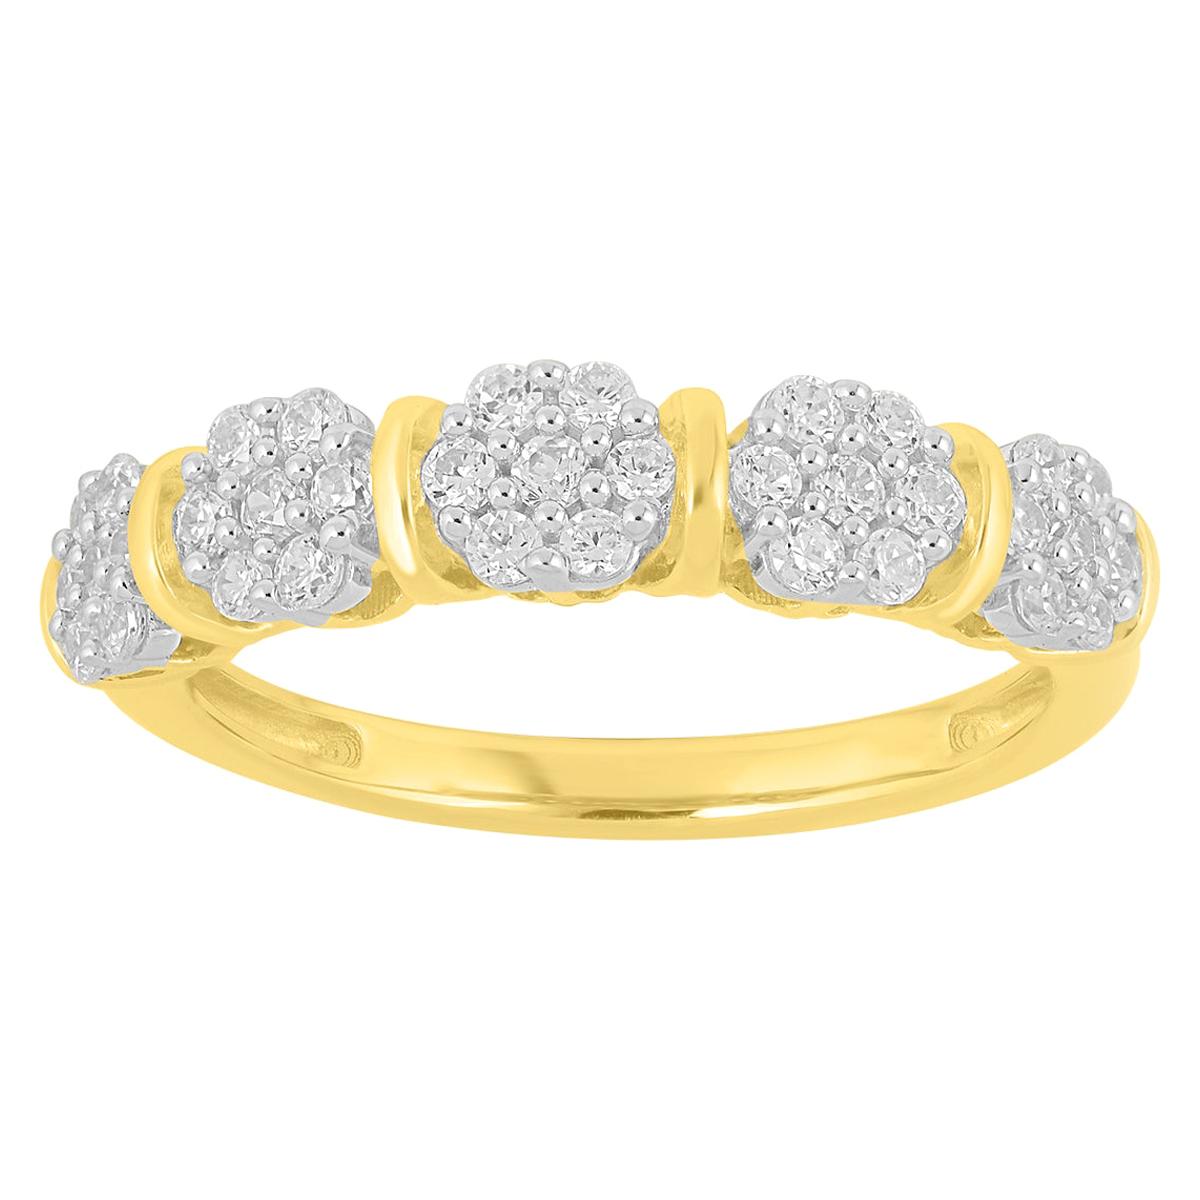 TJD 0.50 Carat Round Diamond 14K Yellow Gold 5 Cluster Fashion Wedding Band Ring For Sale